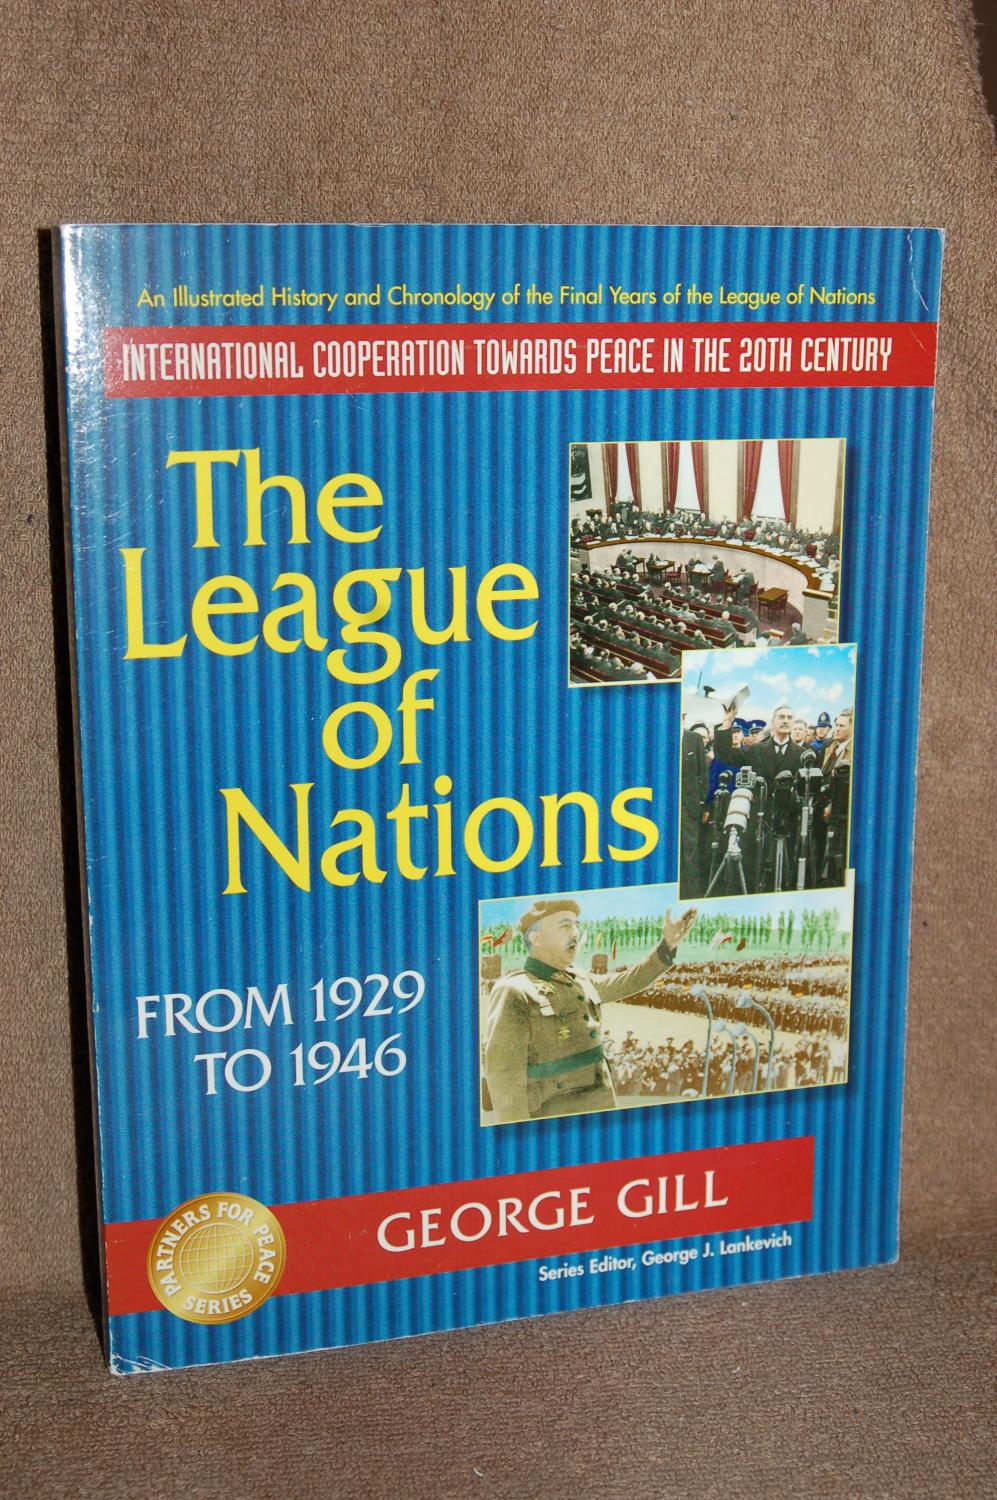 The League of Nations From 1929 to 1946 - George Gill